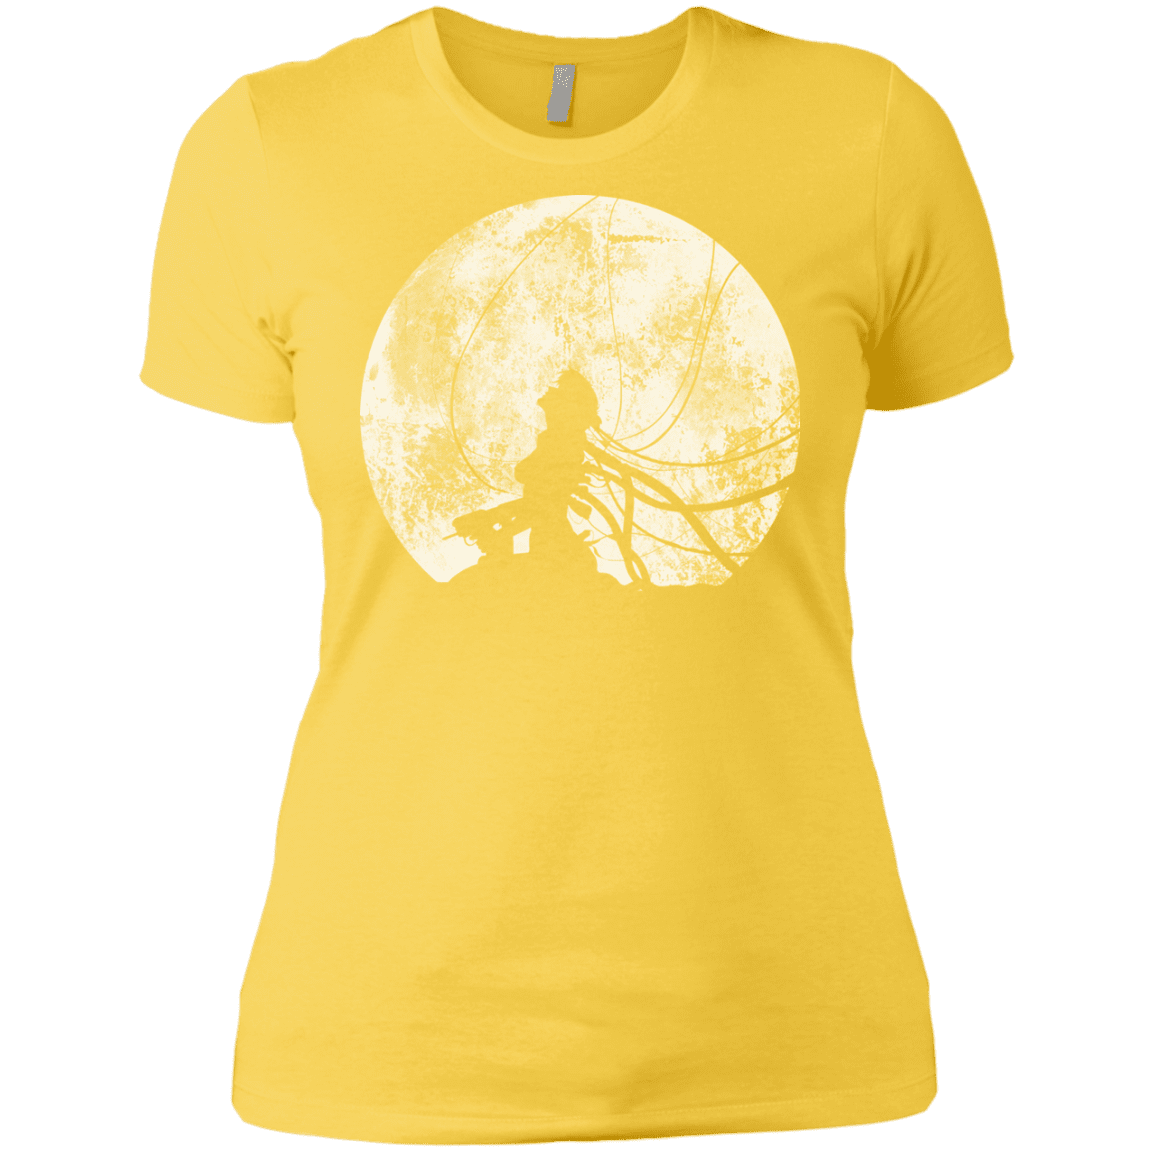 T-Shirts Vibrant Yellow / X-Small Shell of a Ghost Women's Premium T-Shirt